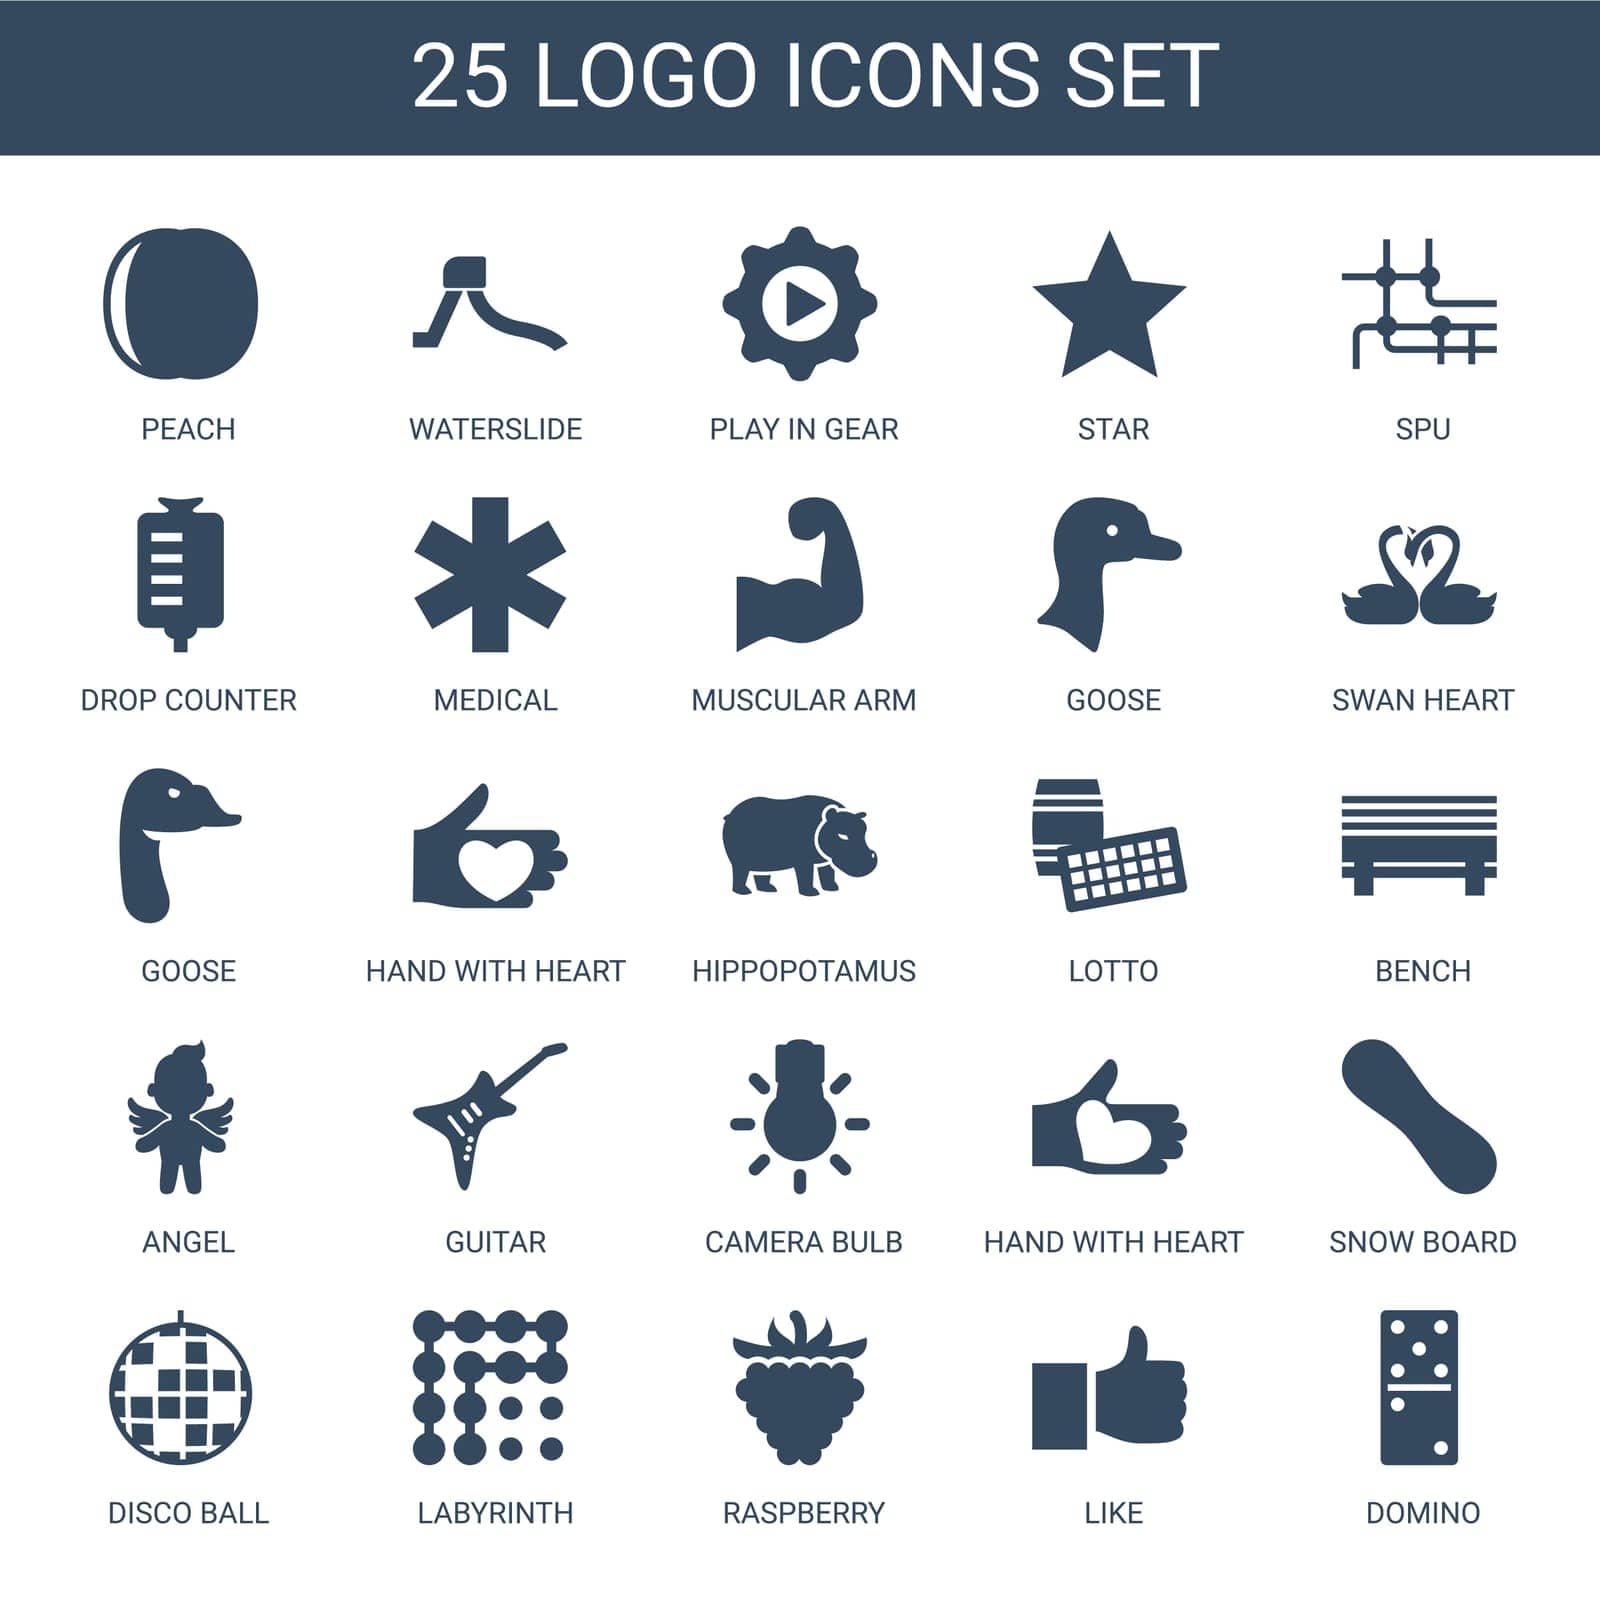 play,drop,muscular,symbol,medical,waterslide,goose,icon,sign,disco,isolated,angel,ball,white,design,logo,vector,domino,camera,arm,hand,raspberry,set,star,bench,like,in,bulb,swan,peach,lotto,counter,heart,guitar,hippopotamus,with,snow,background,spu,labyrinth,illustration,board,gear by ogqcorp